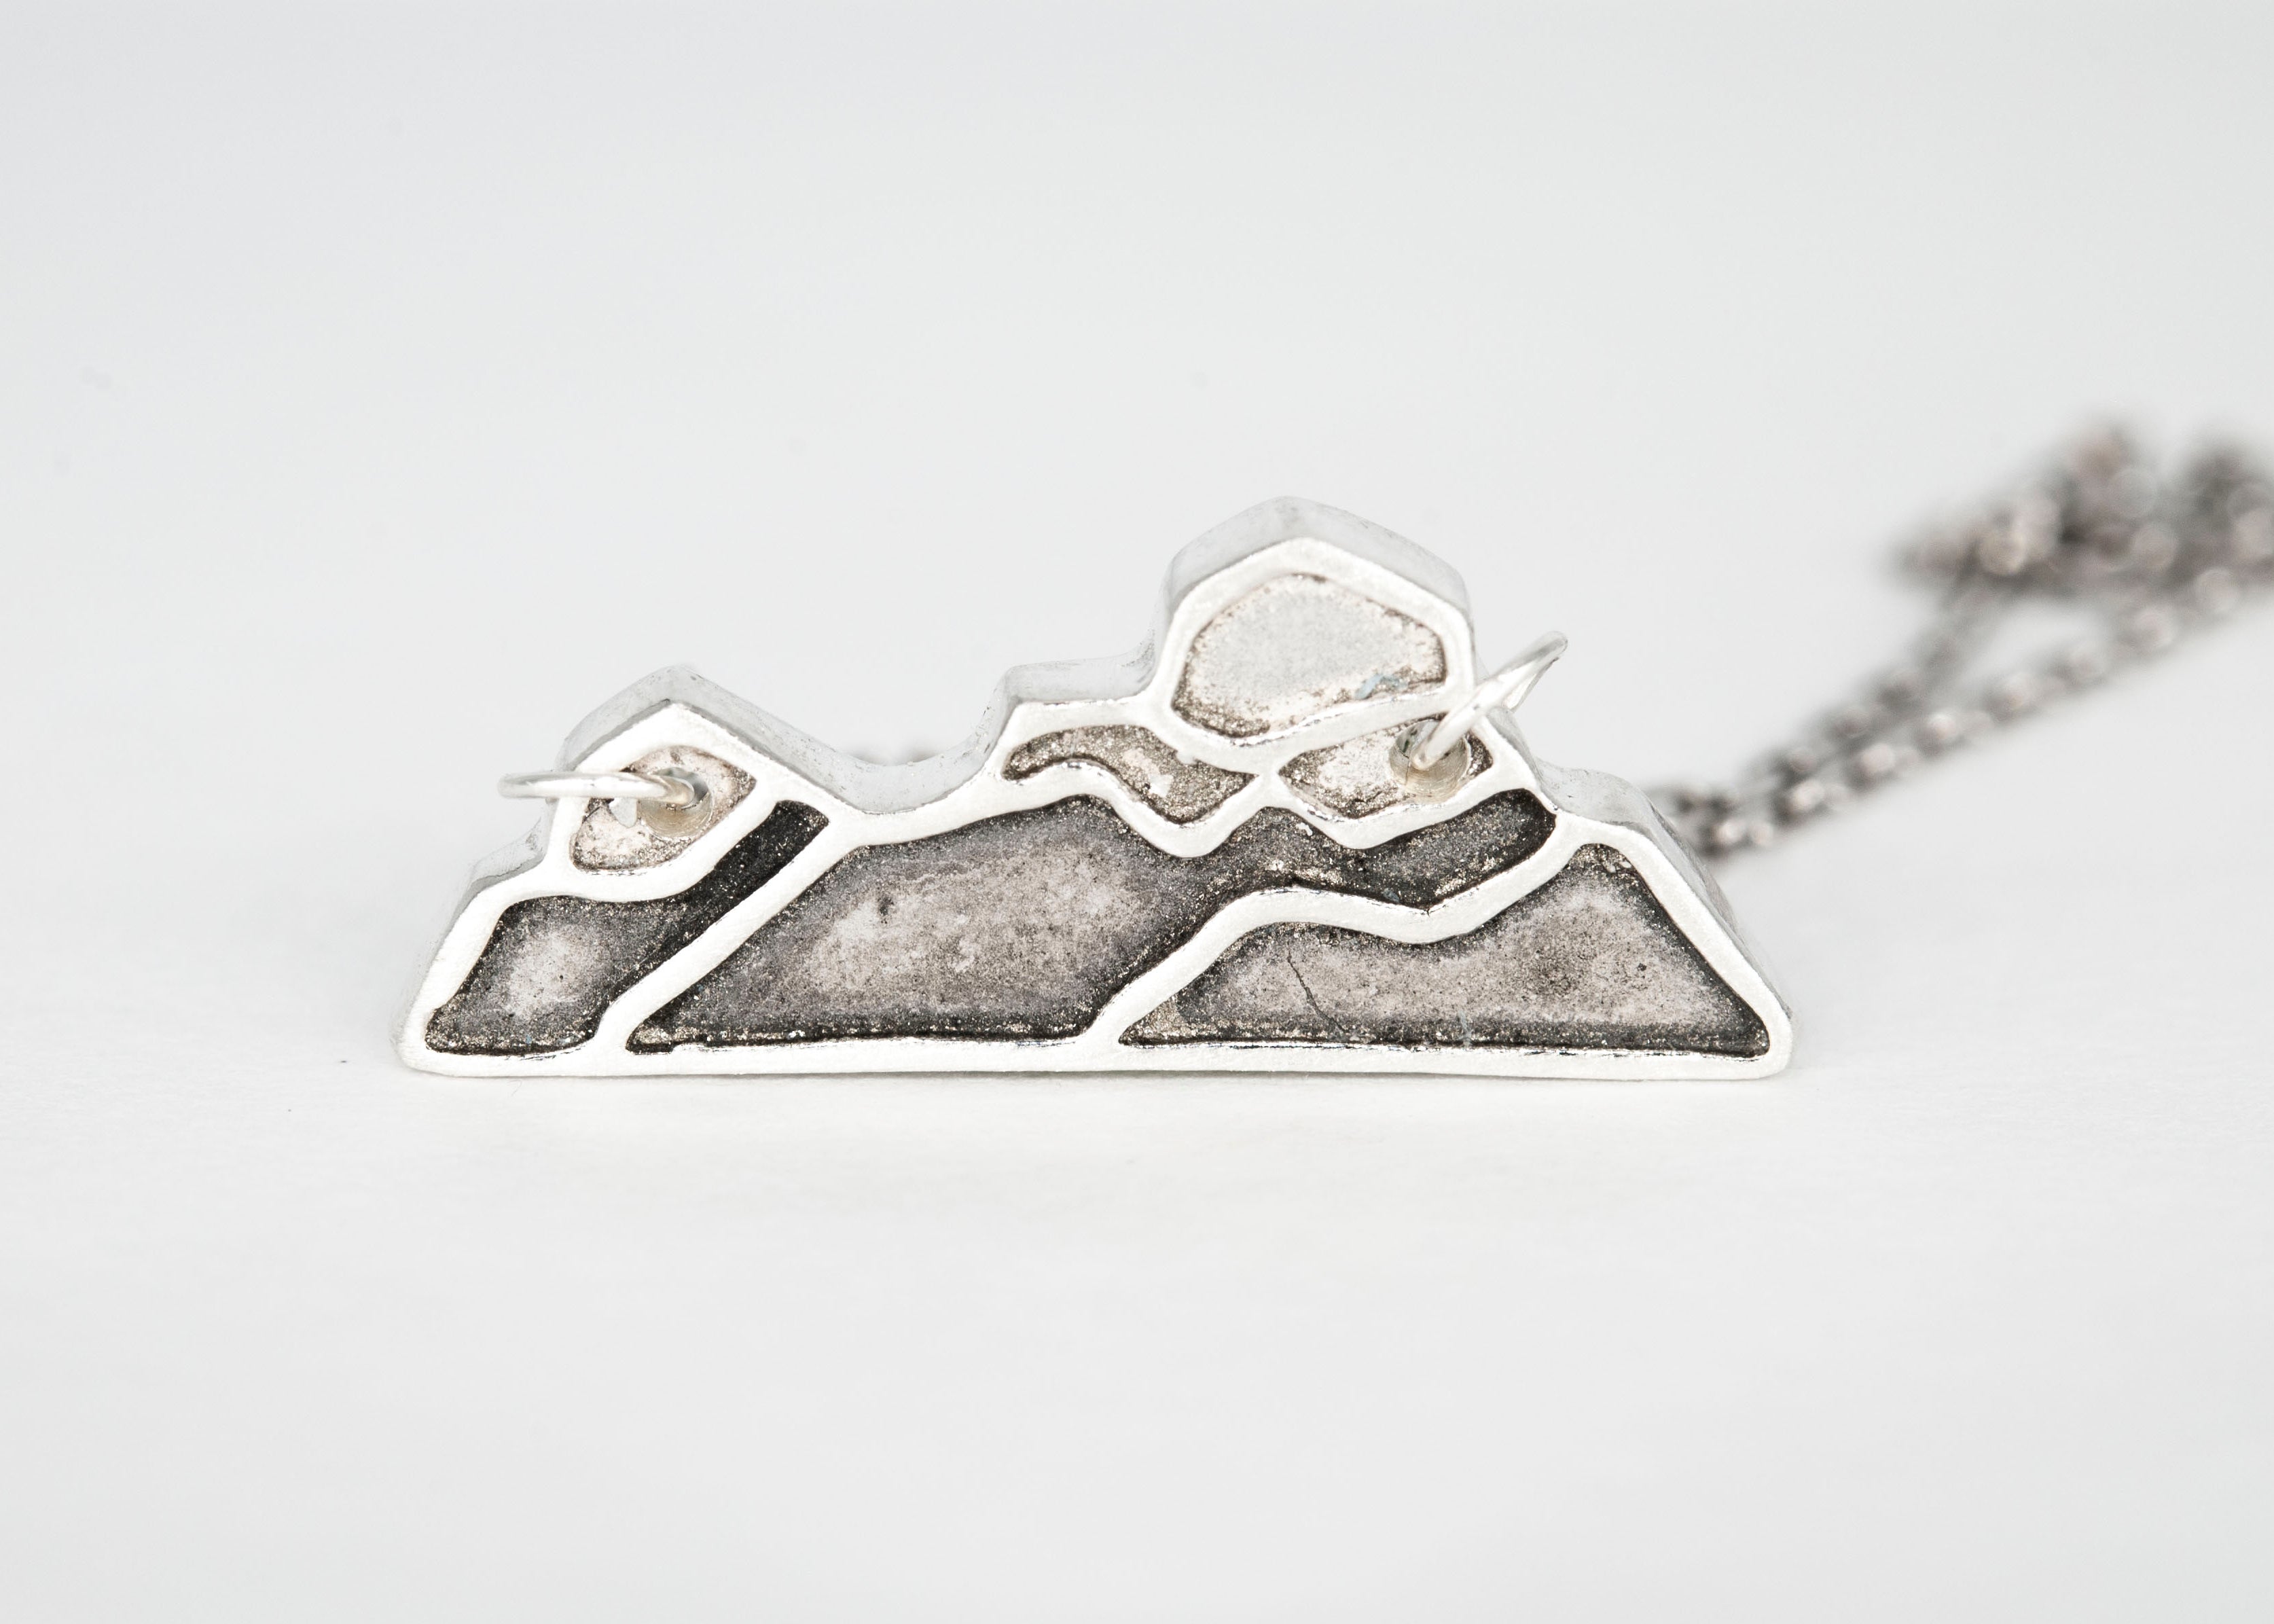 Crowsnest Mountain Necklace